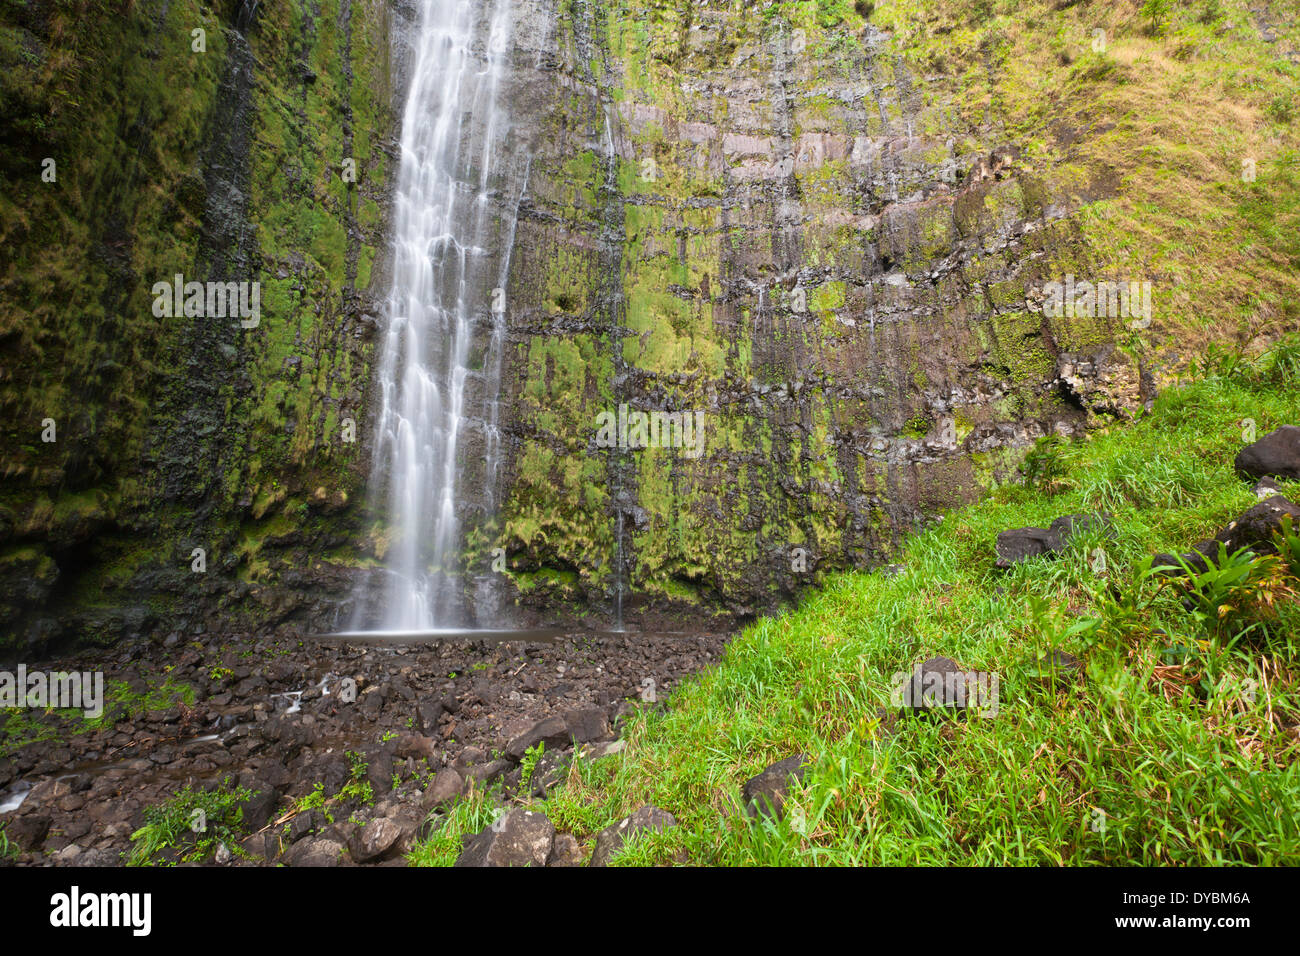 The famous Waimoku Falls in Maui, Hawaii with a height of more than 120 meters. Stock Photo